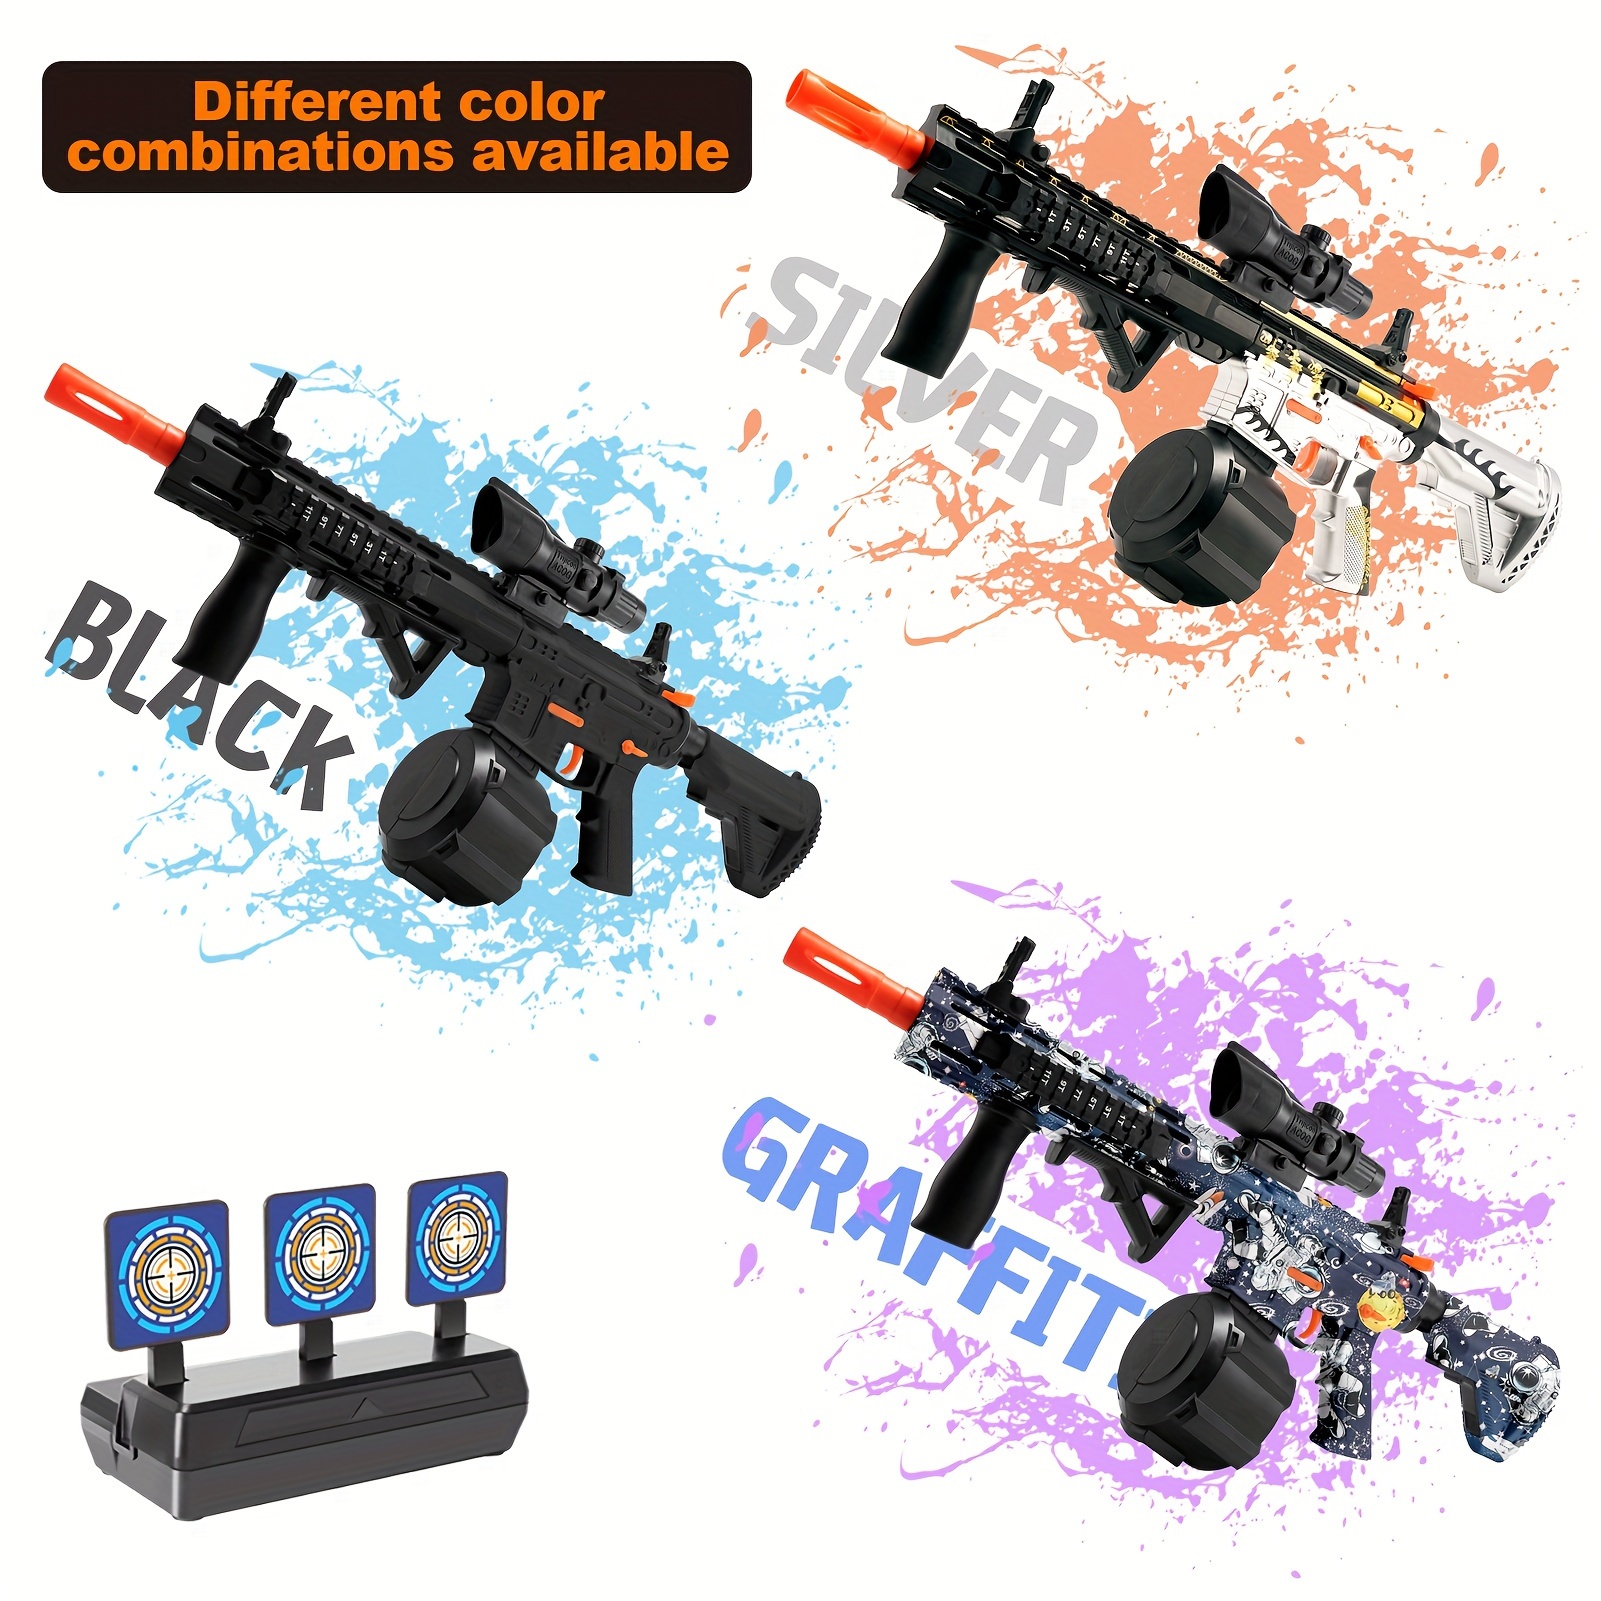 Barrett M82 electric automatic gel blaster toy for boys, Christmas gift for  kids, manual and electric 2 modes